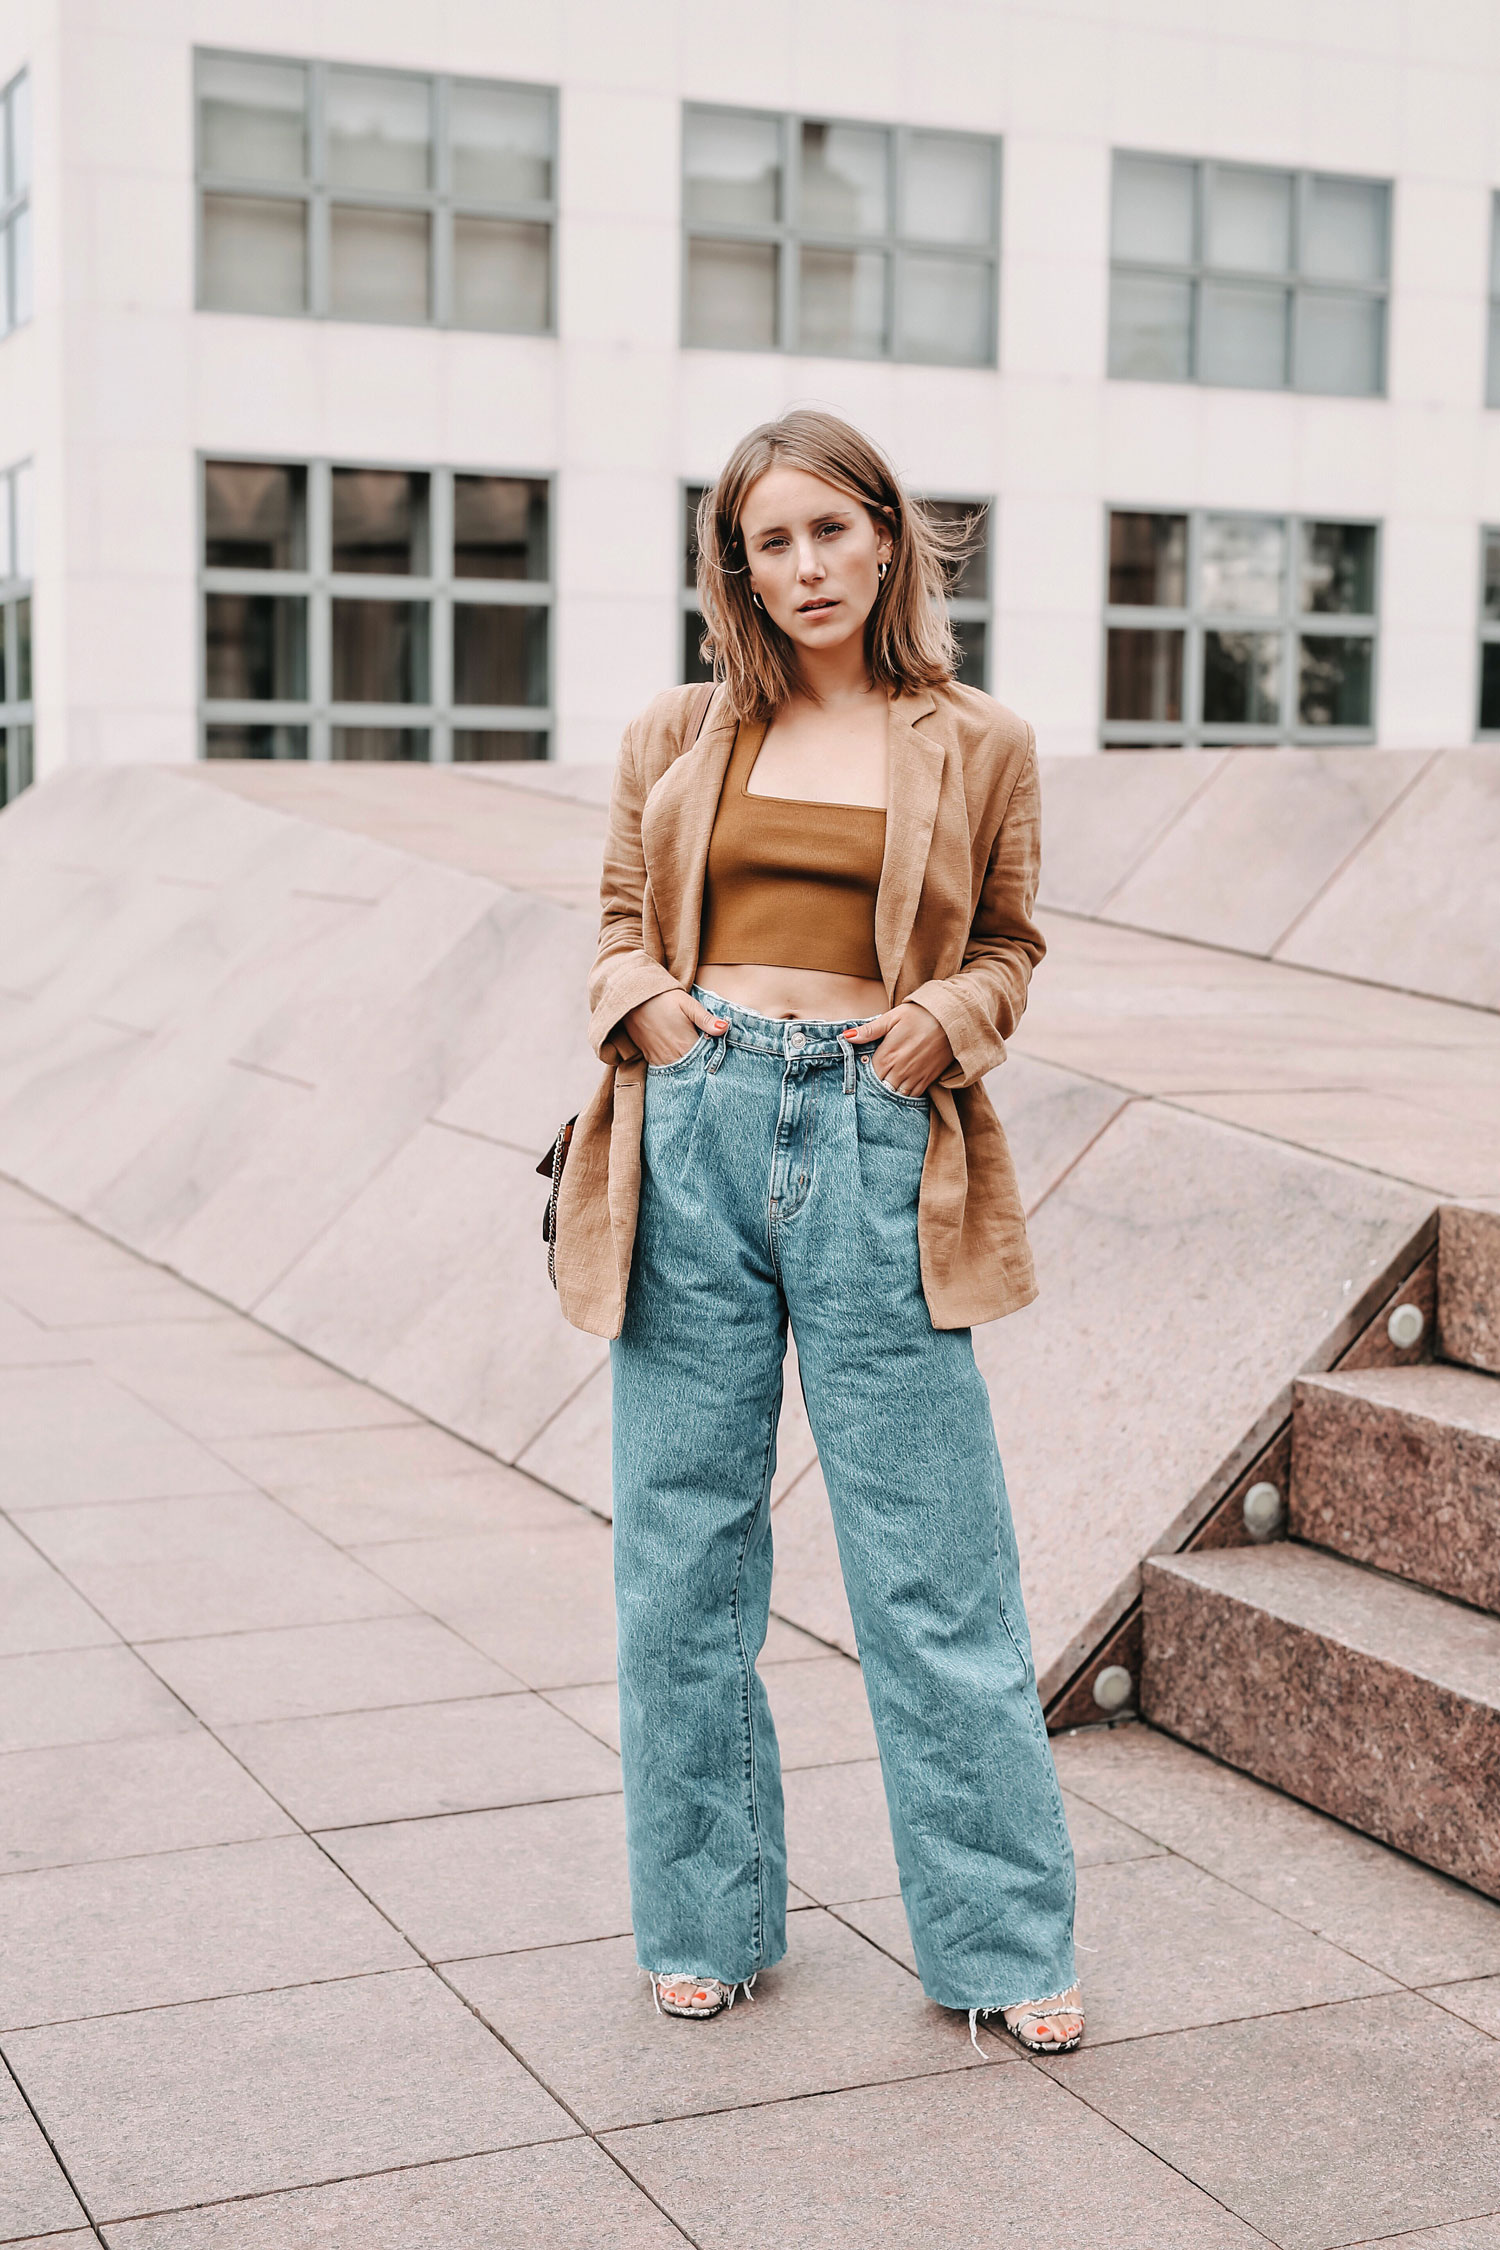 Styleguide 3 Outfit ideas for the trendy Wide Leg Jeans Shoppisticated